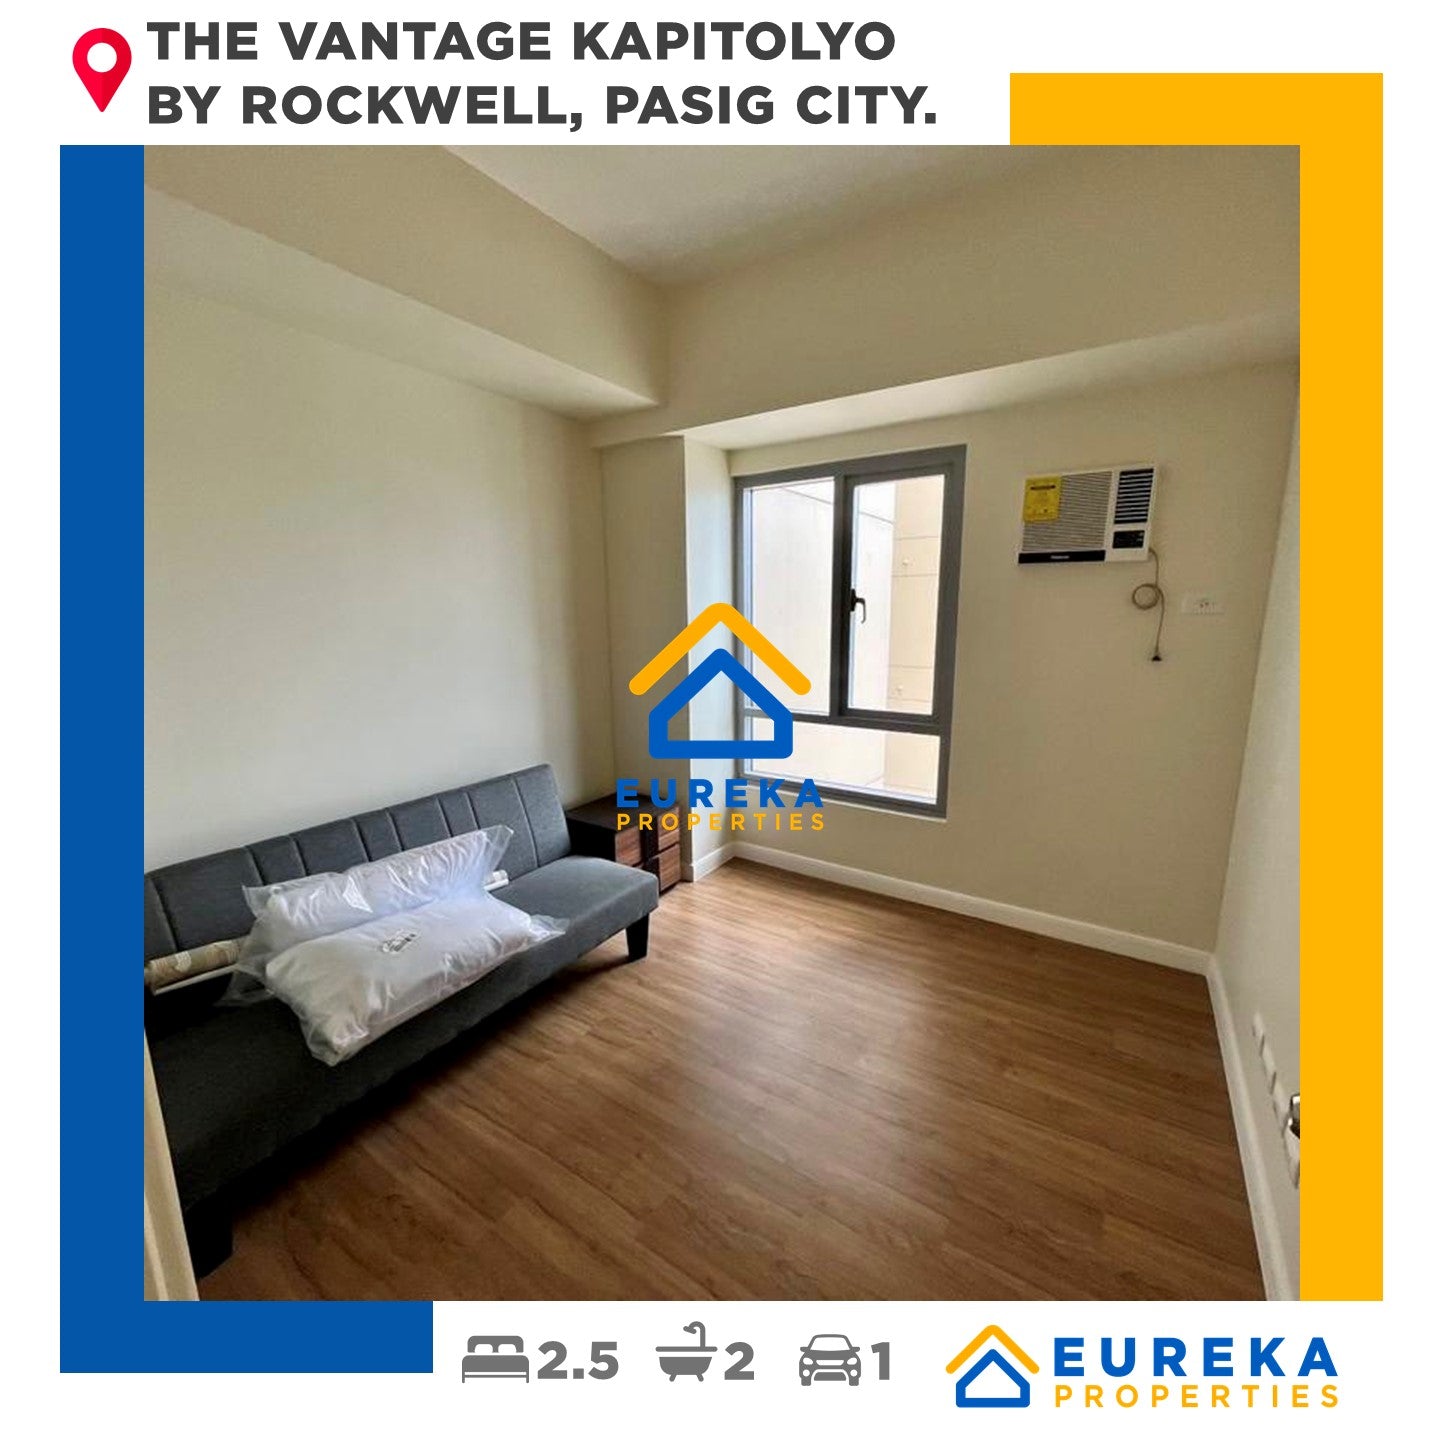 Fully furnished and designed 2BR 72 sqm corner unit at Vantage Kapitolyo by Rockwell.